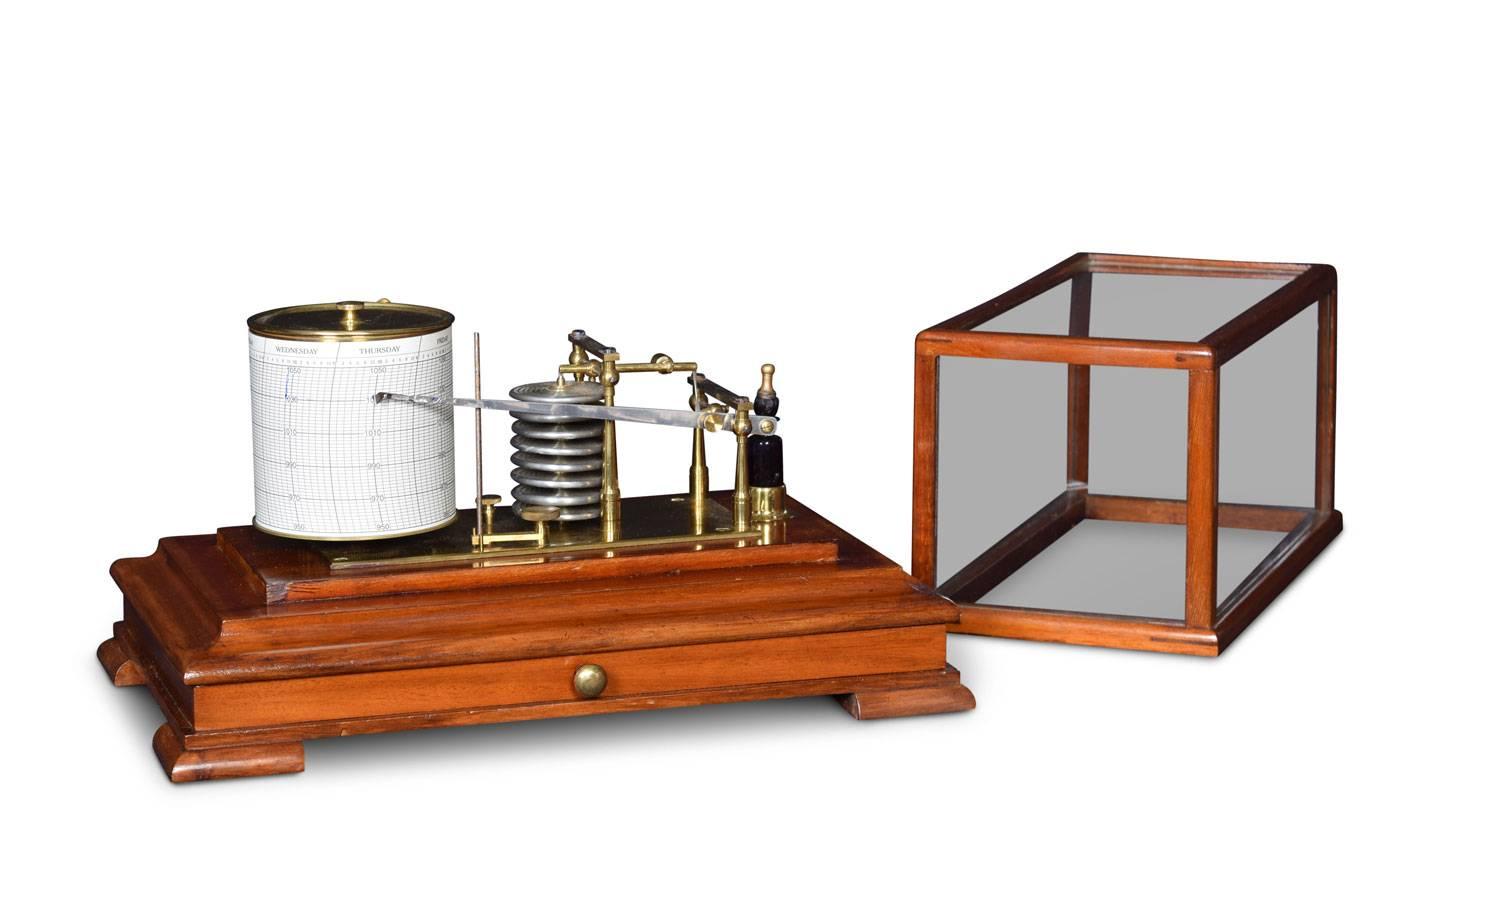 Mahogany cased barograph, having five glazed removable lid, and a drawer below to house the charts. The mechanical eight-day movement is housed in the drum, fitted with a seven-day chart which covers one full rotation of the drum. The ink trace, or